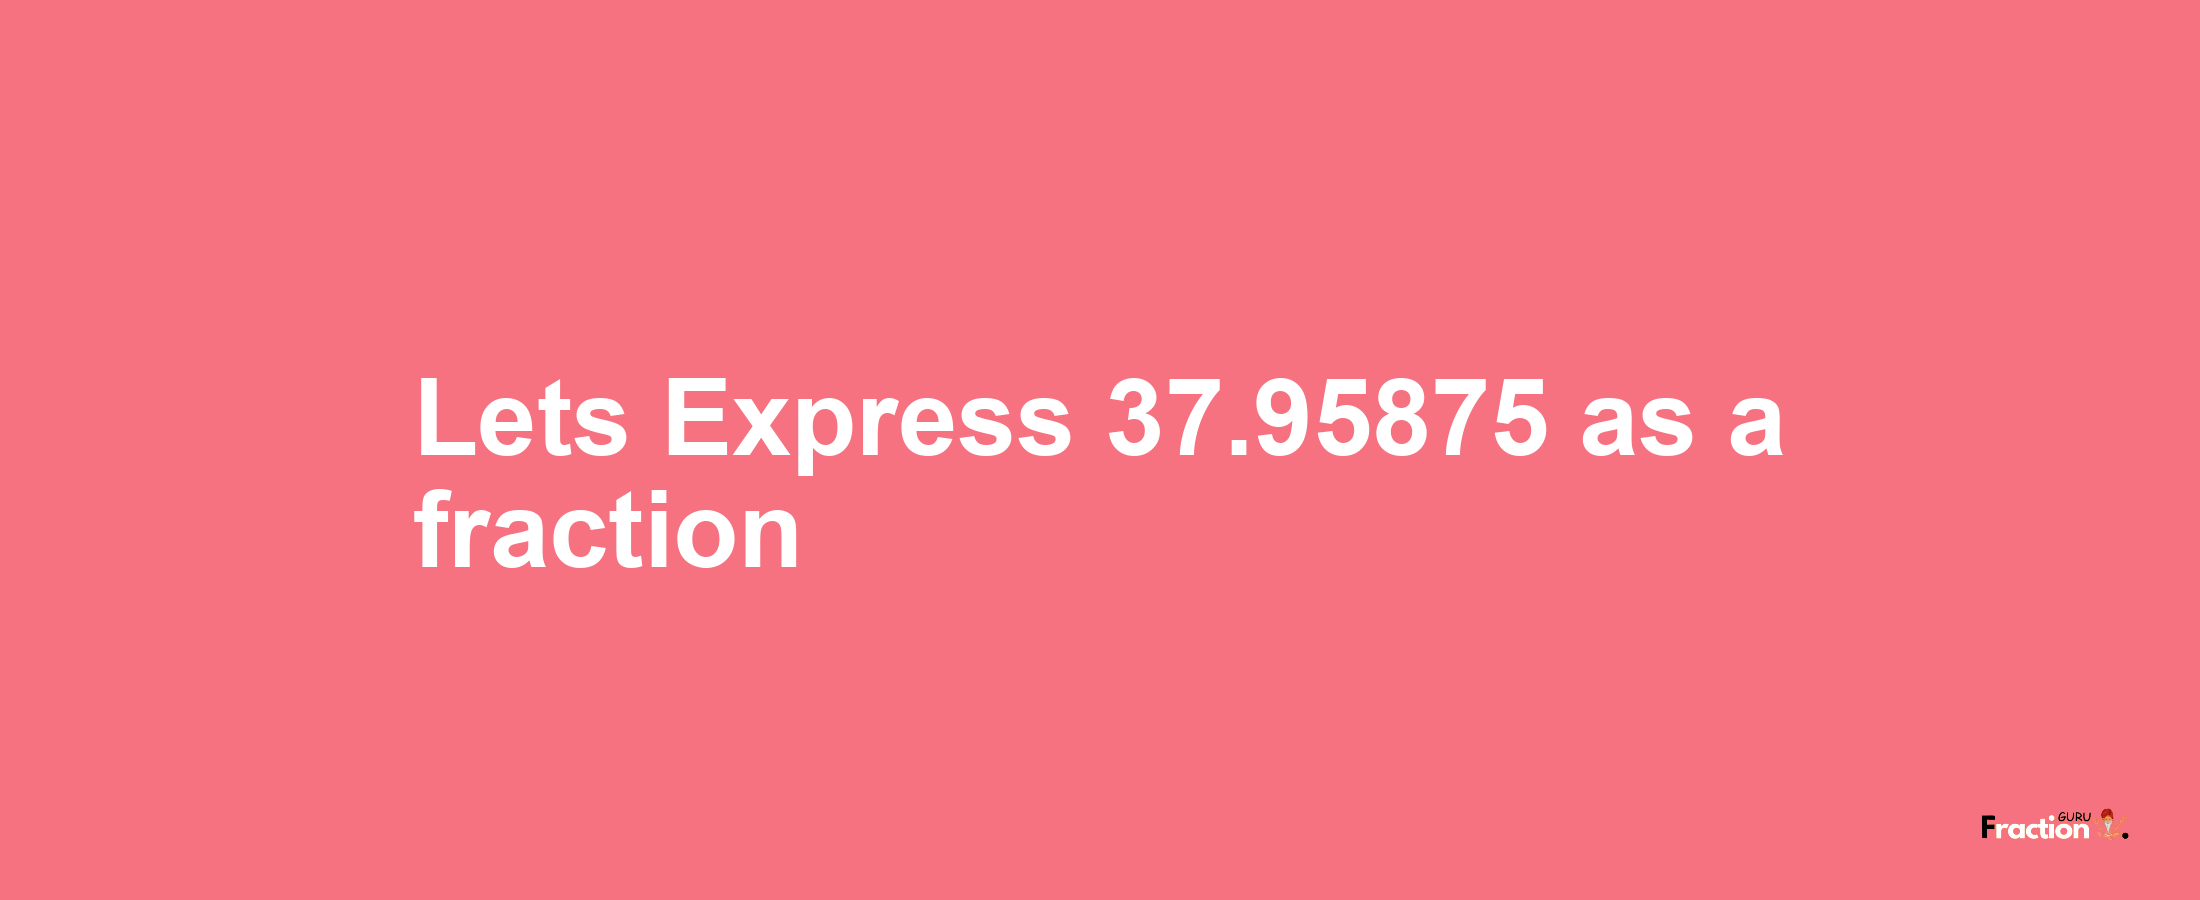 Lets Express 37.95875 as afraction